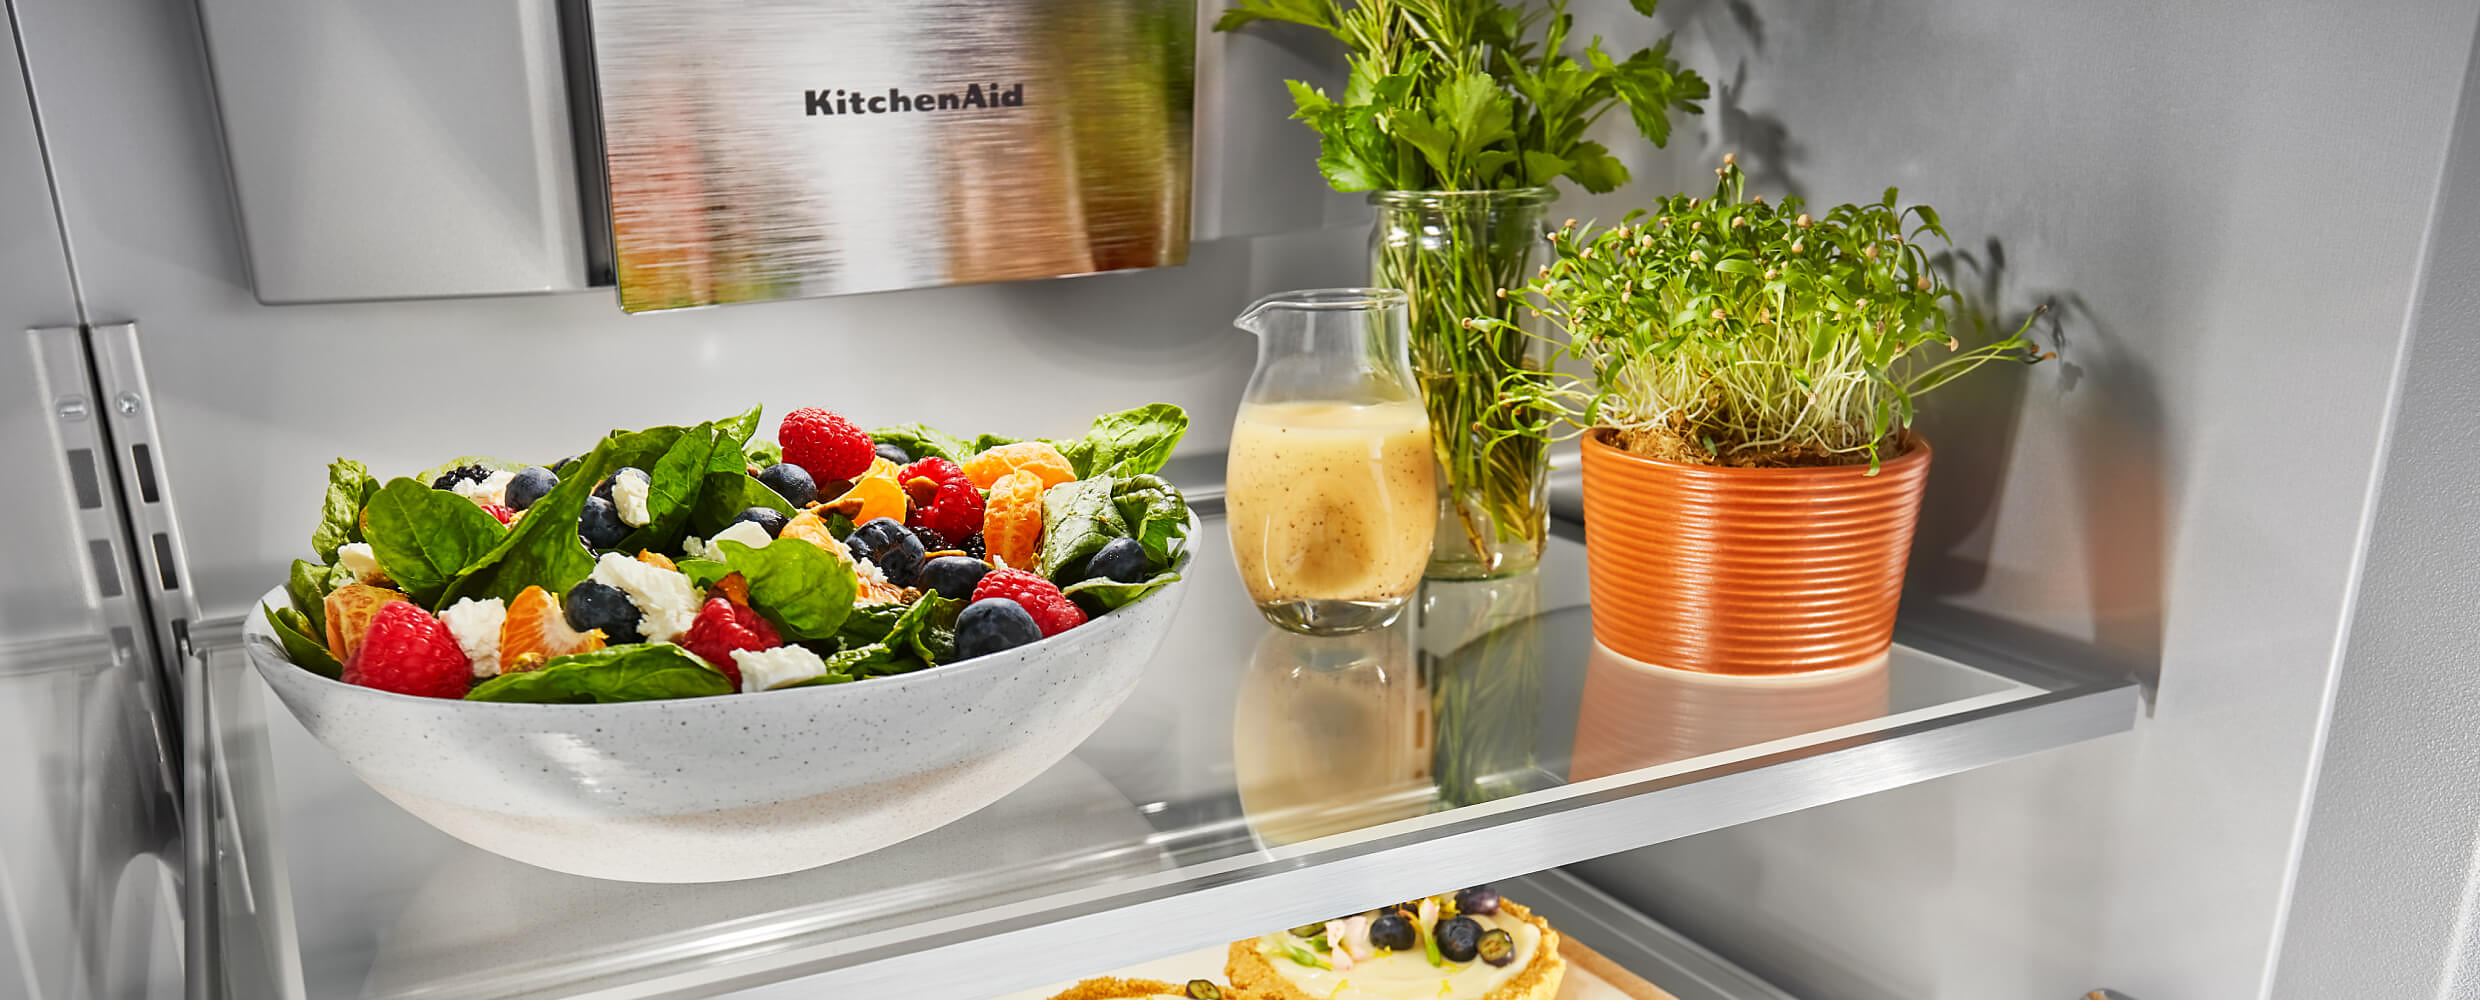 Interior of a 42" KitchenAid® Built-In Side-by-Side Refrigerator filled with a large fresh salad, beverages and herbs